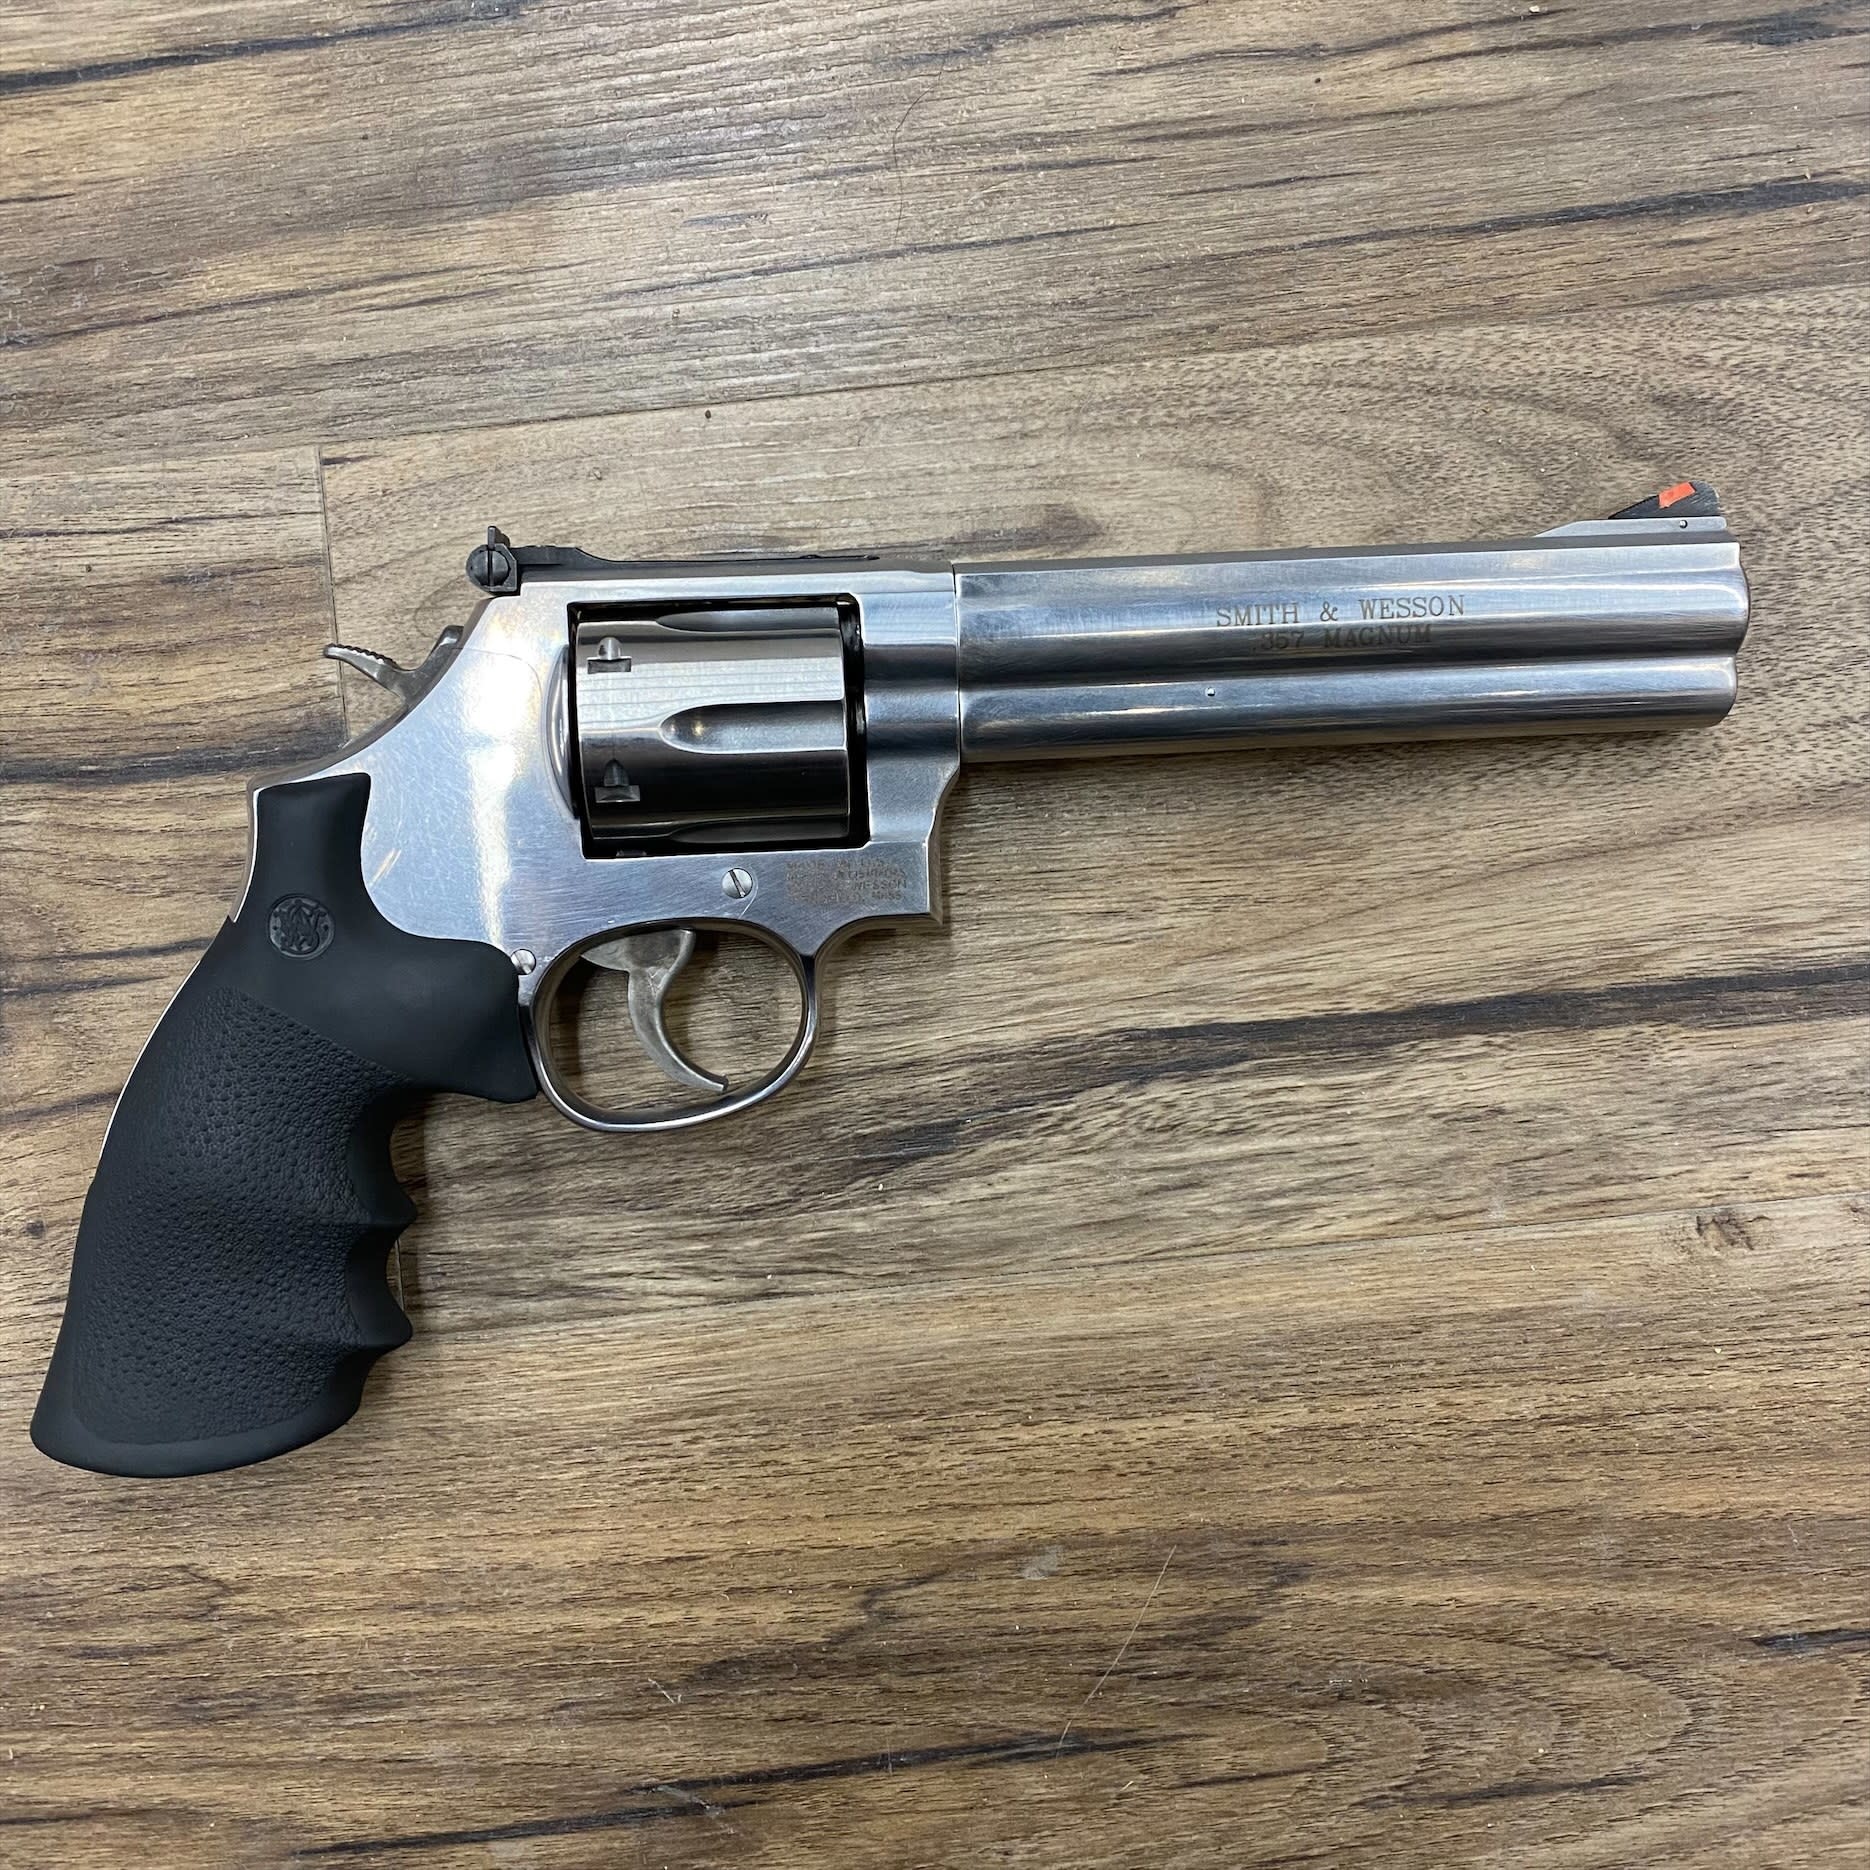 SMITH & WESSON SMITH & WESSON 686-6 REVOLVER, 357 MAG, 6” BARREL, STAINLESS, PRE-OWNED